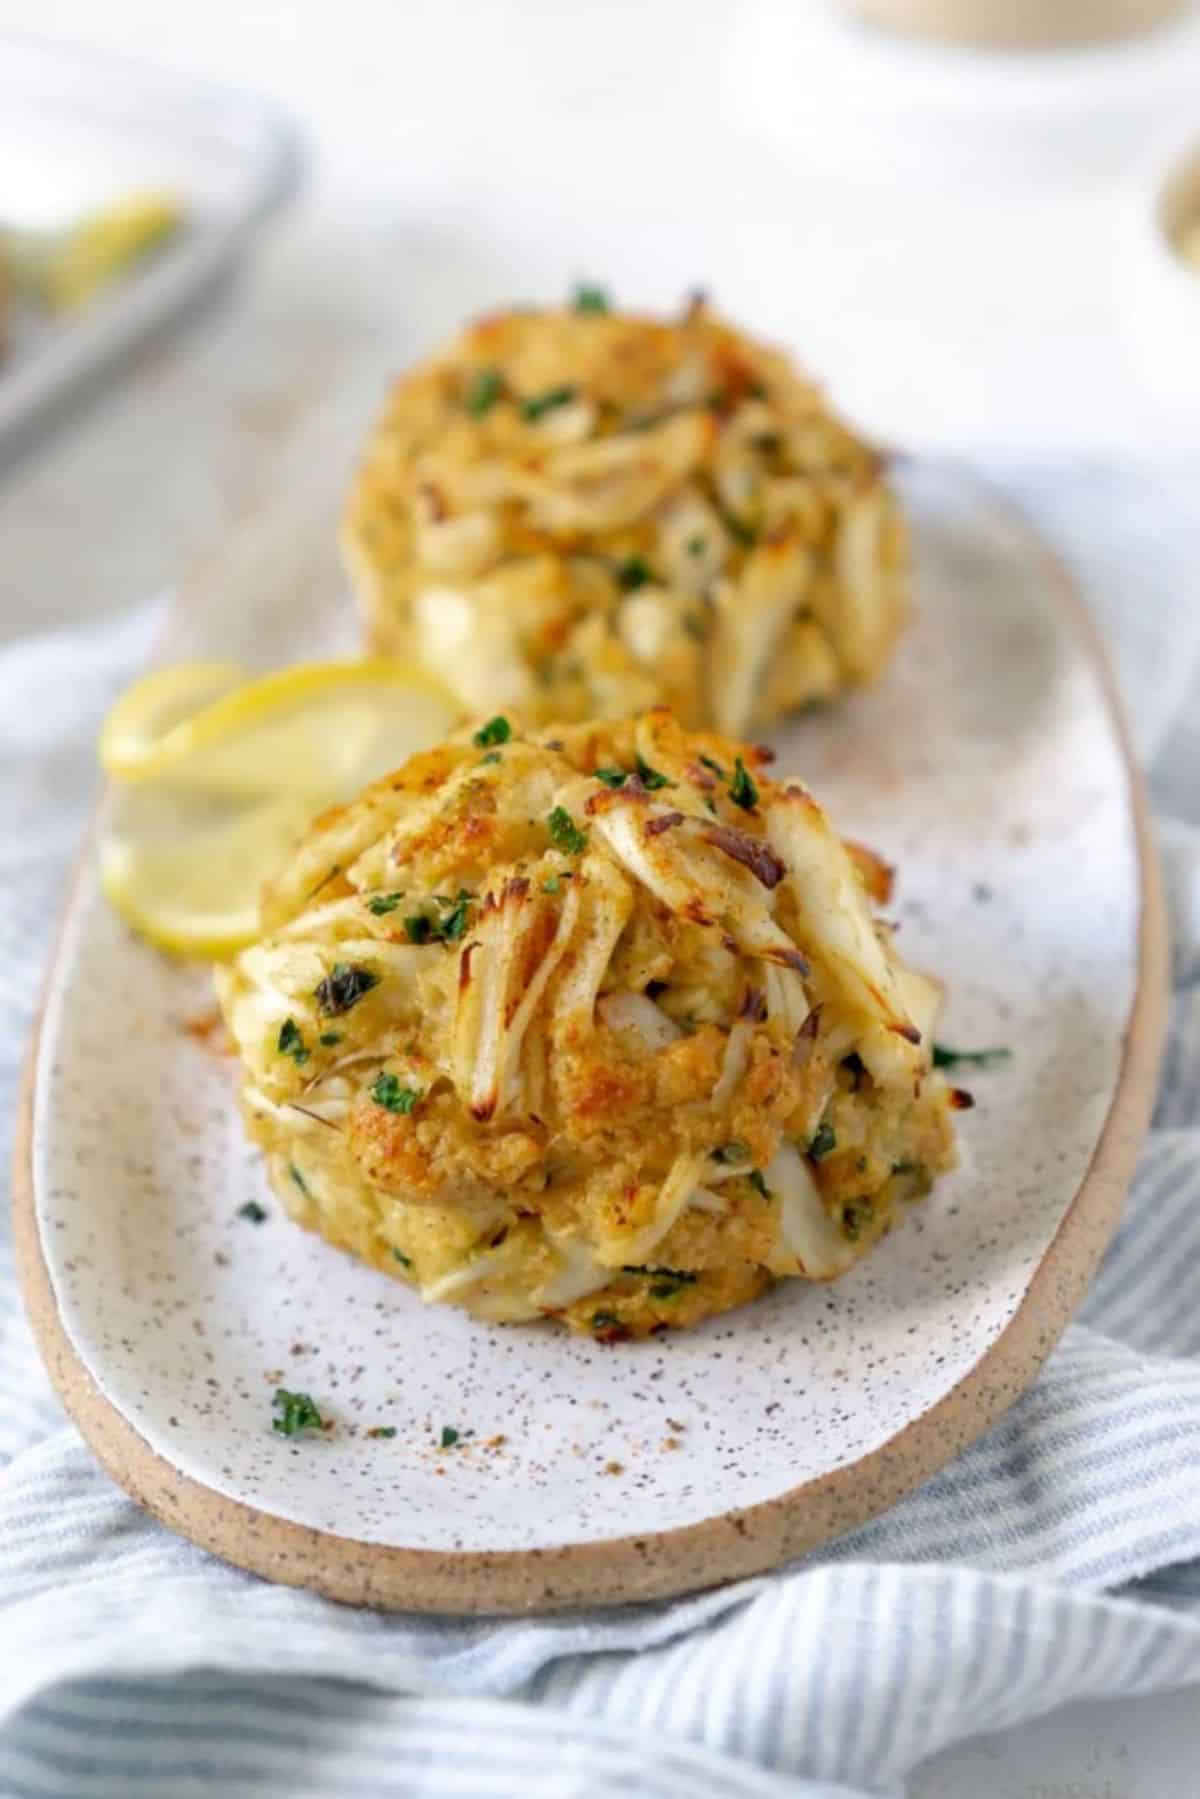 Scrumptious maryland crab cakes on a tray.